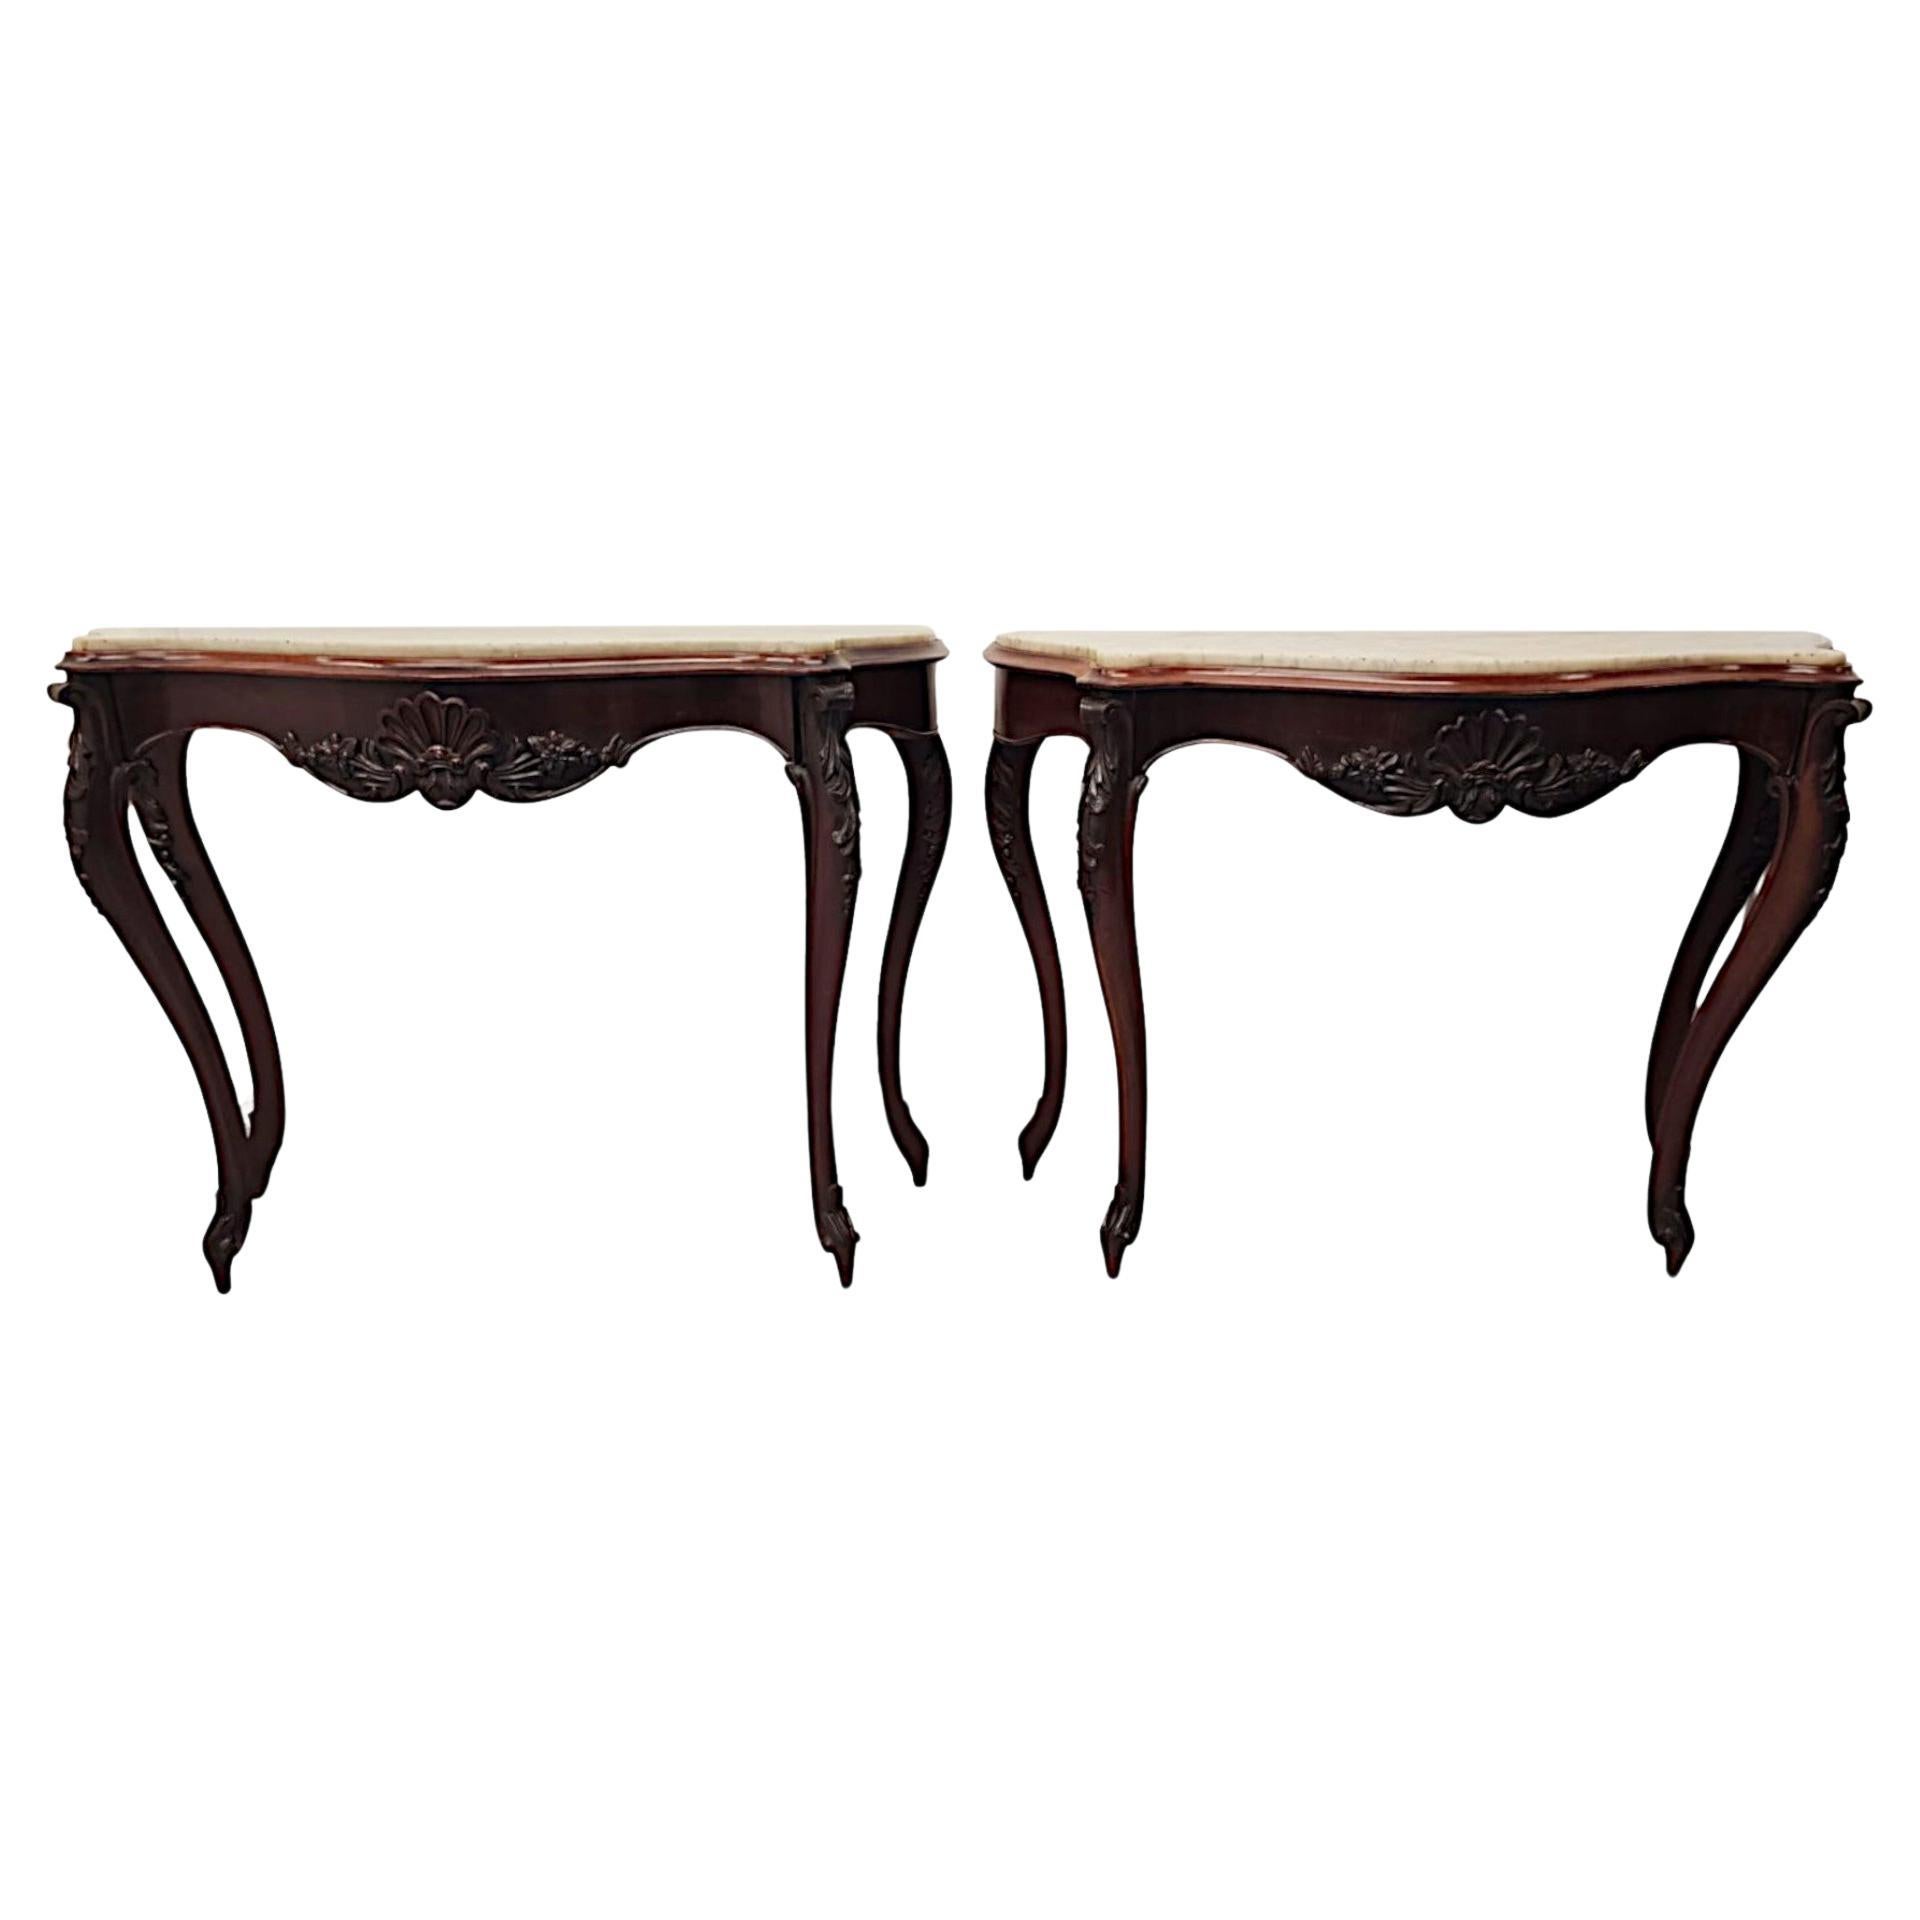 A Very Rare Pair of 19th Century Marble Top Console Tables